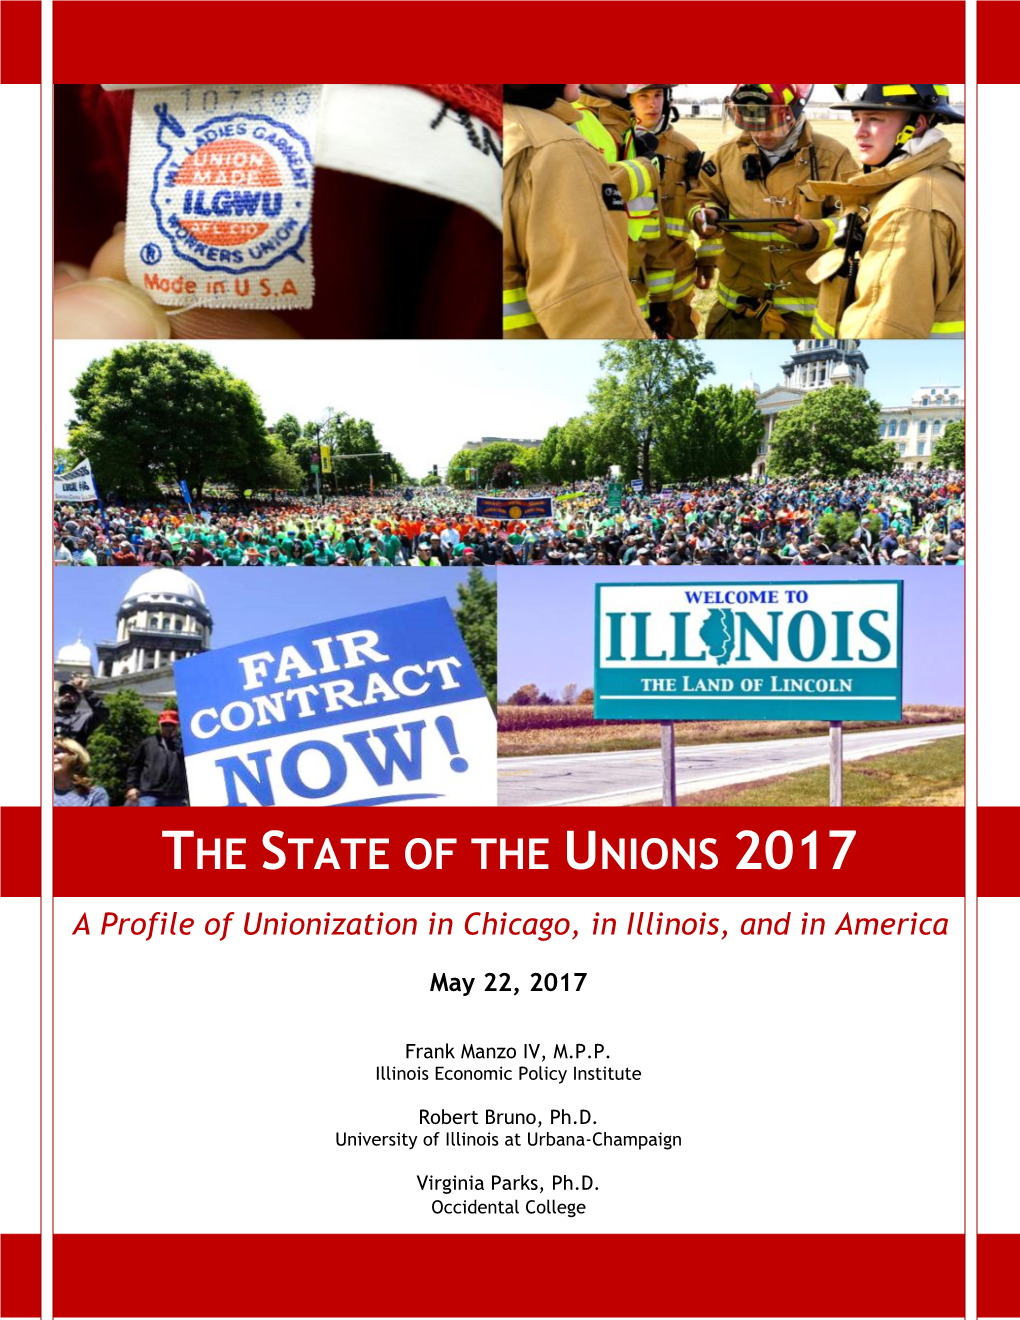 The State of the Unions 2017